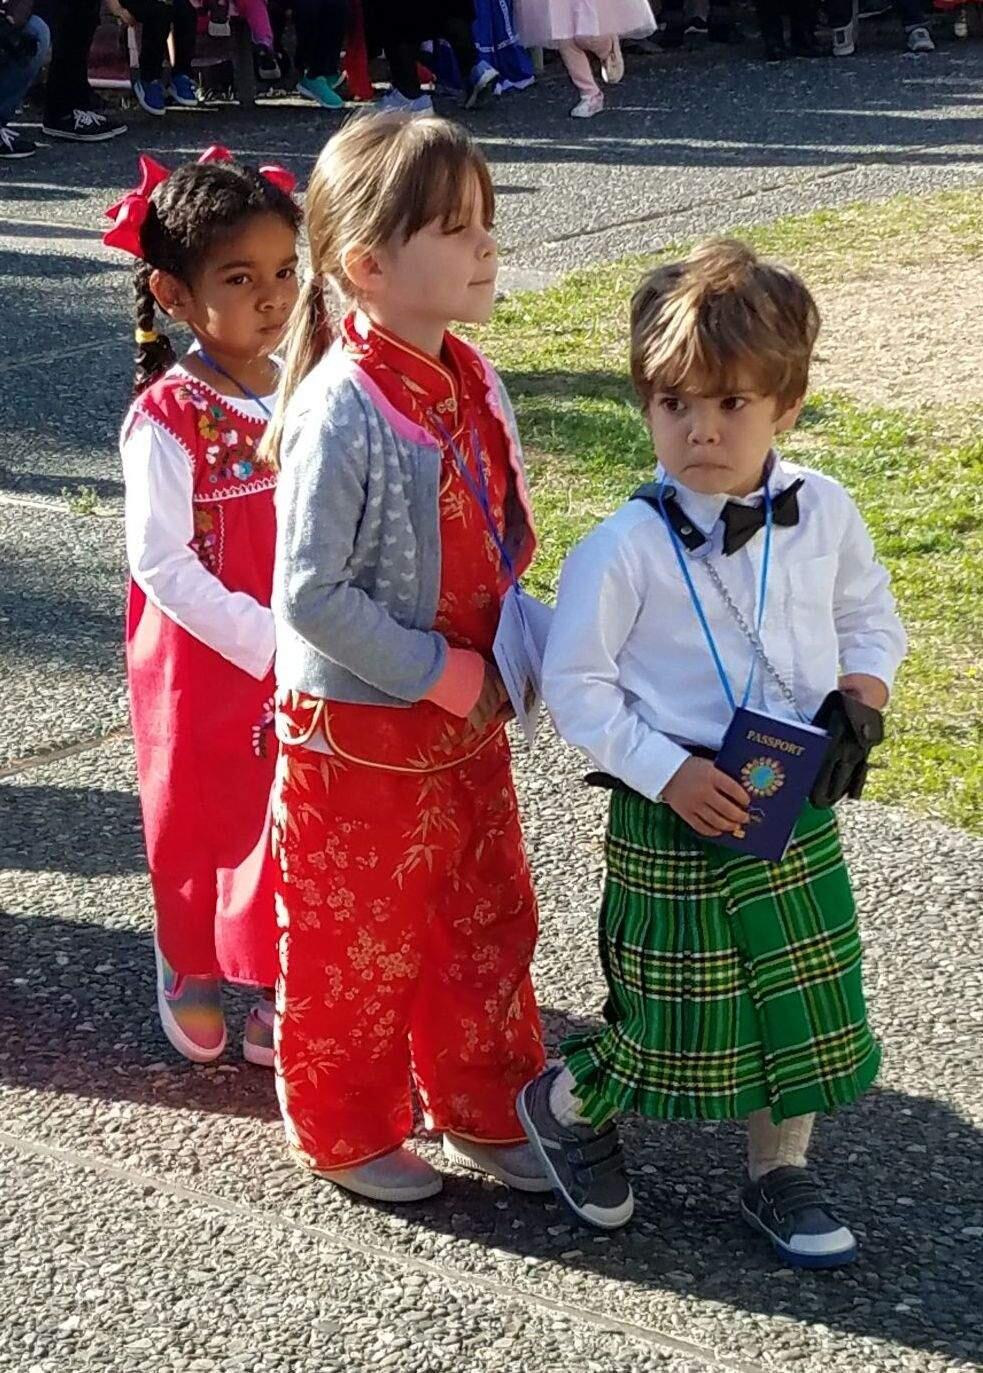 JOHN JACKSON/ARGUS-COURIER STAFFSpring Hill students were focused on their job as they paraded in the dress of the country of their heritage in the school's International Day Festival.